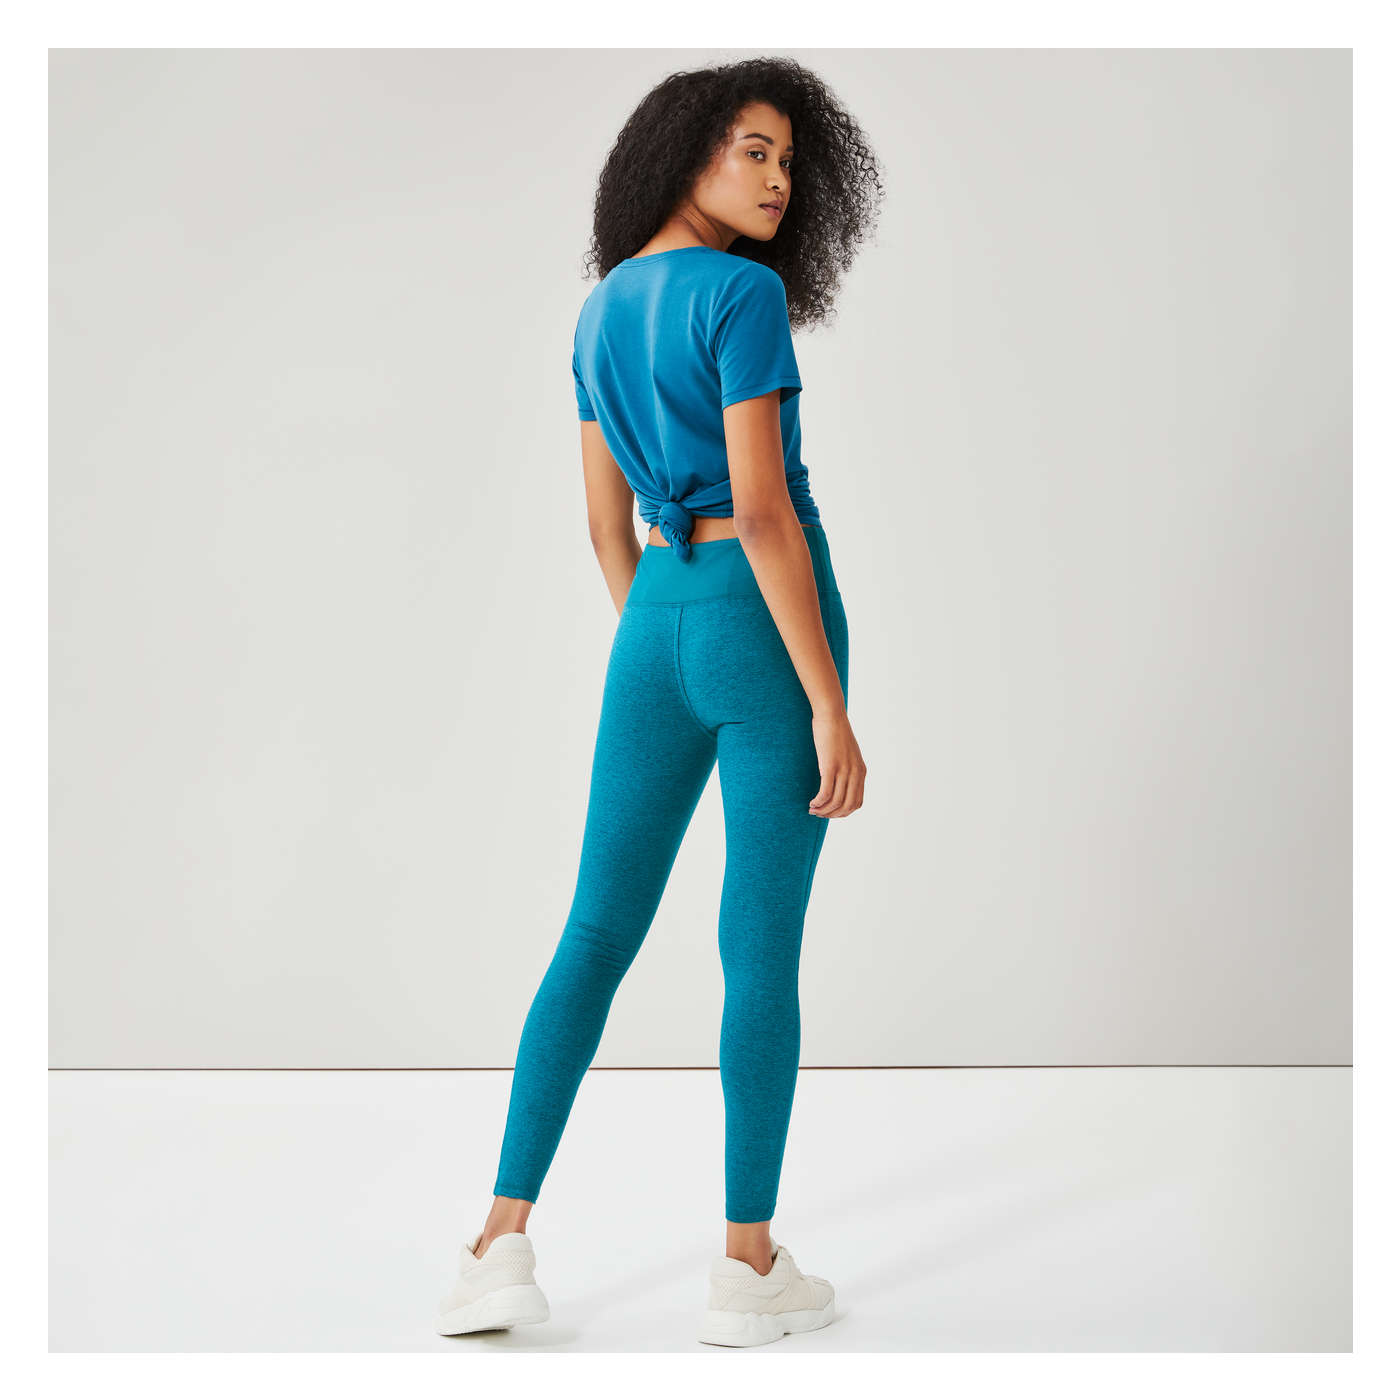 Active Legging in Teal Mix from Joe Fresh